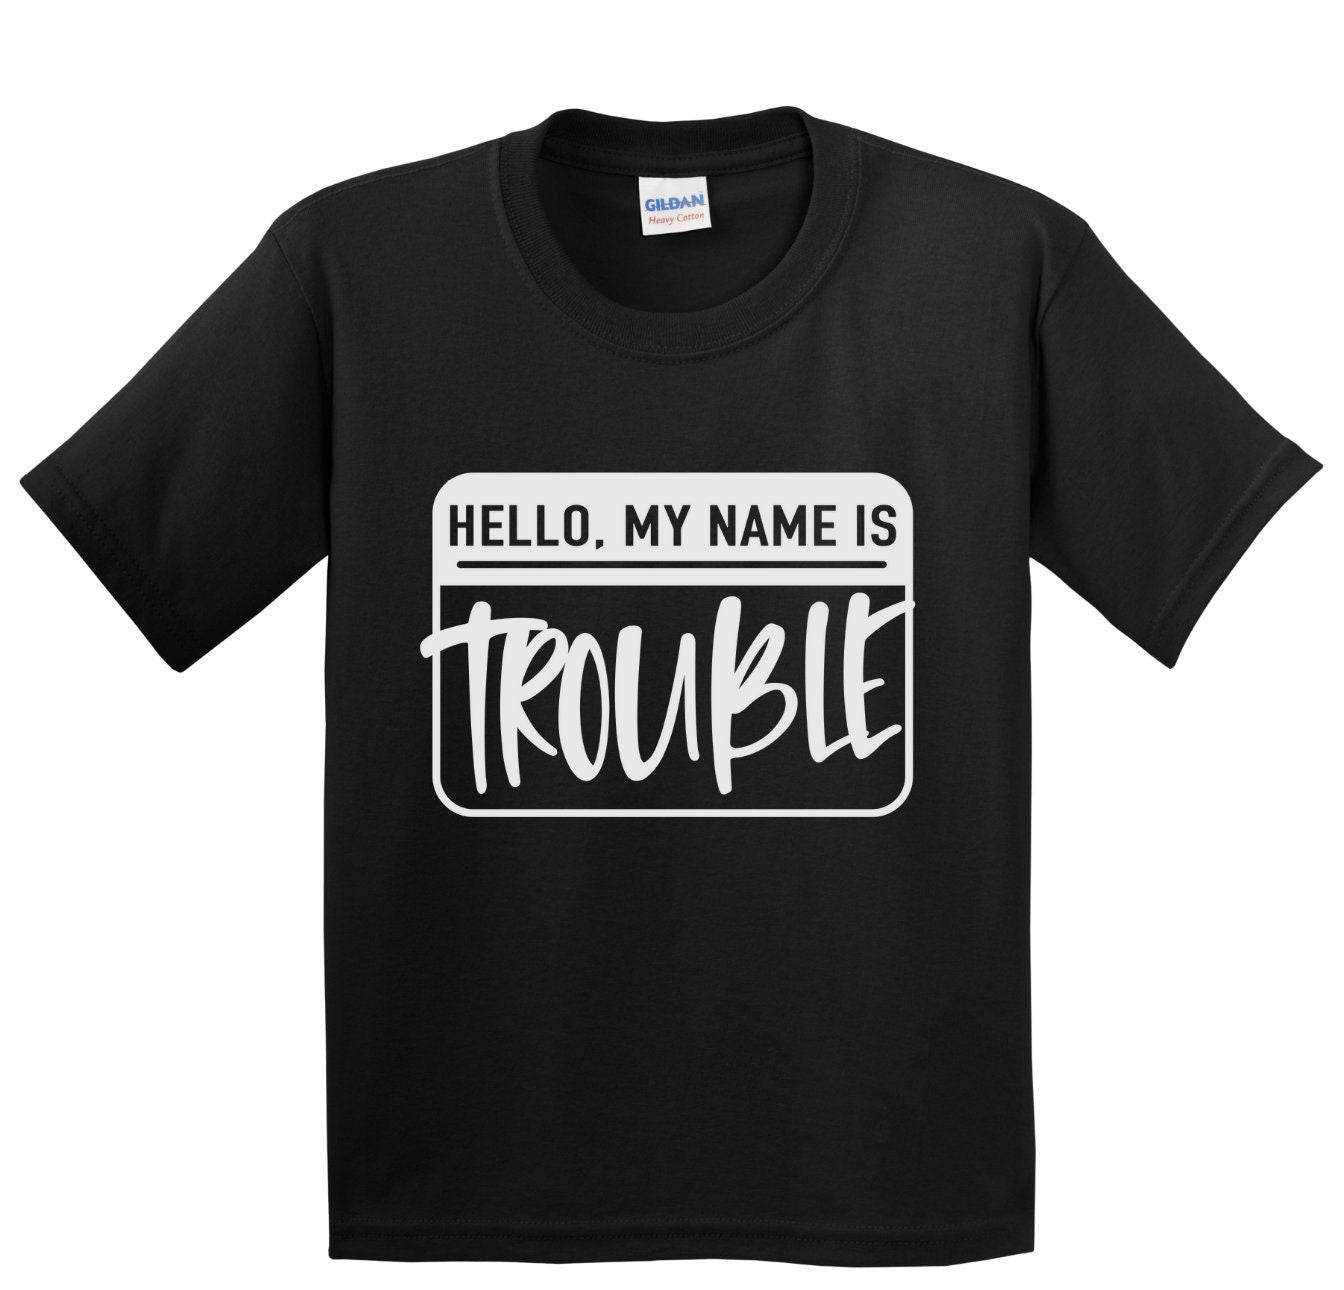 My Name is Trouble Kids Tee, Cotton